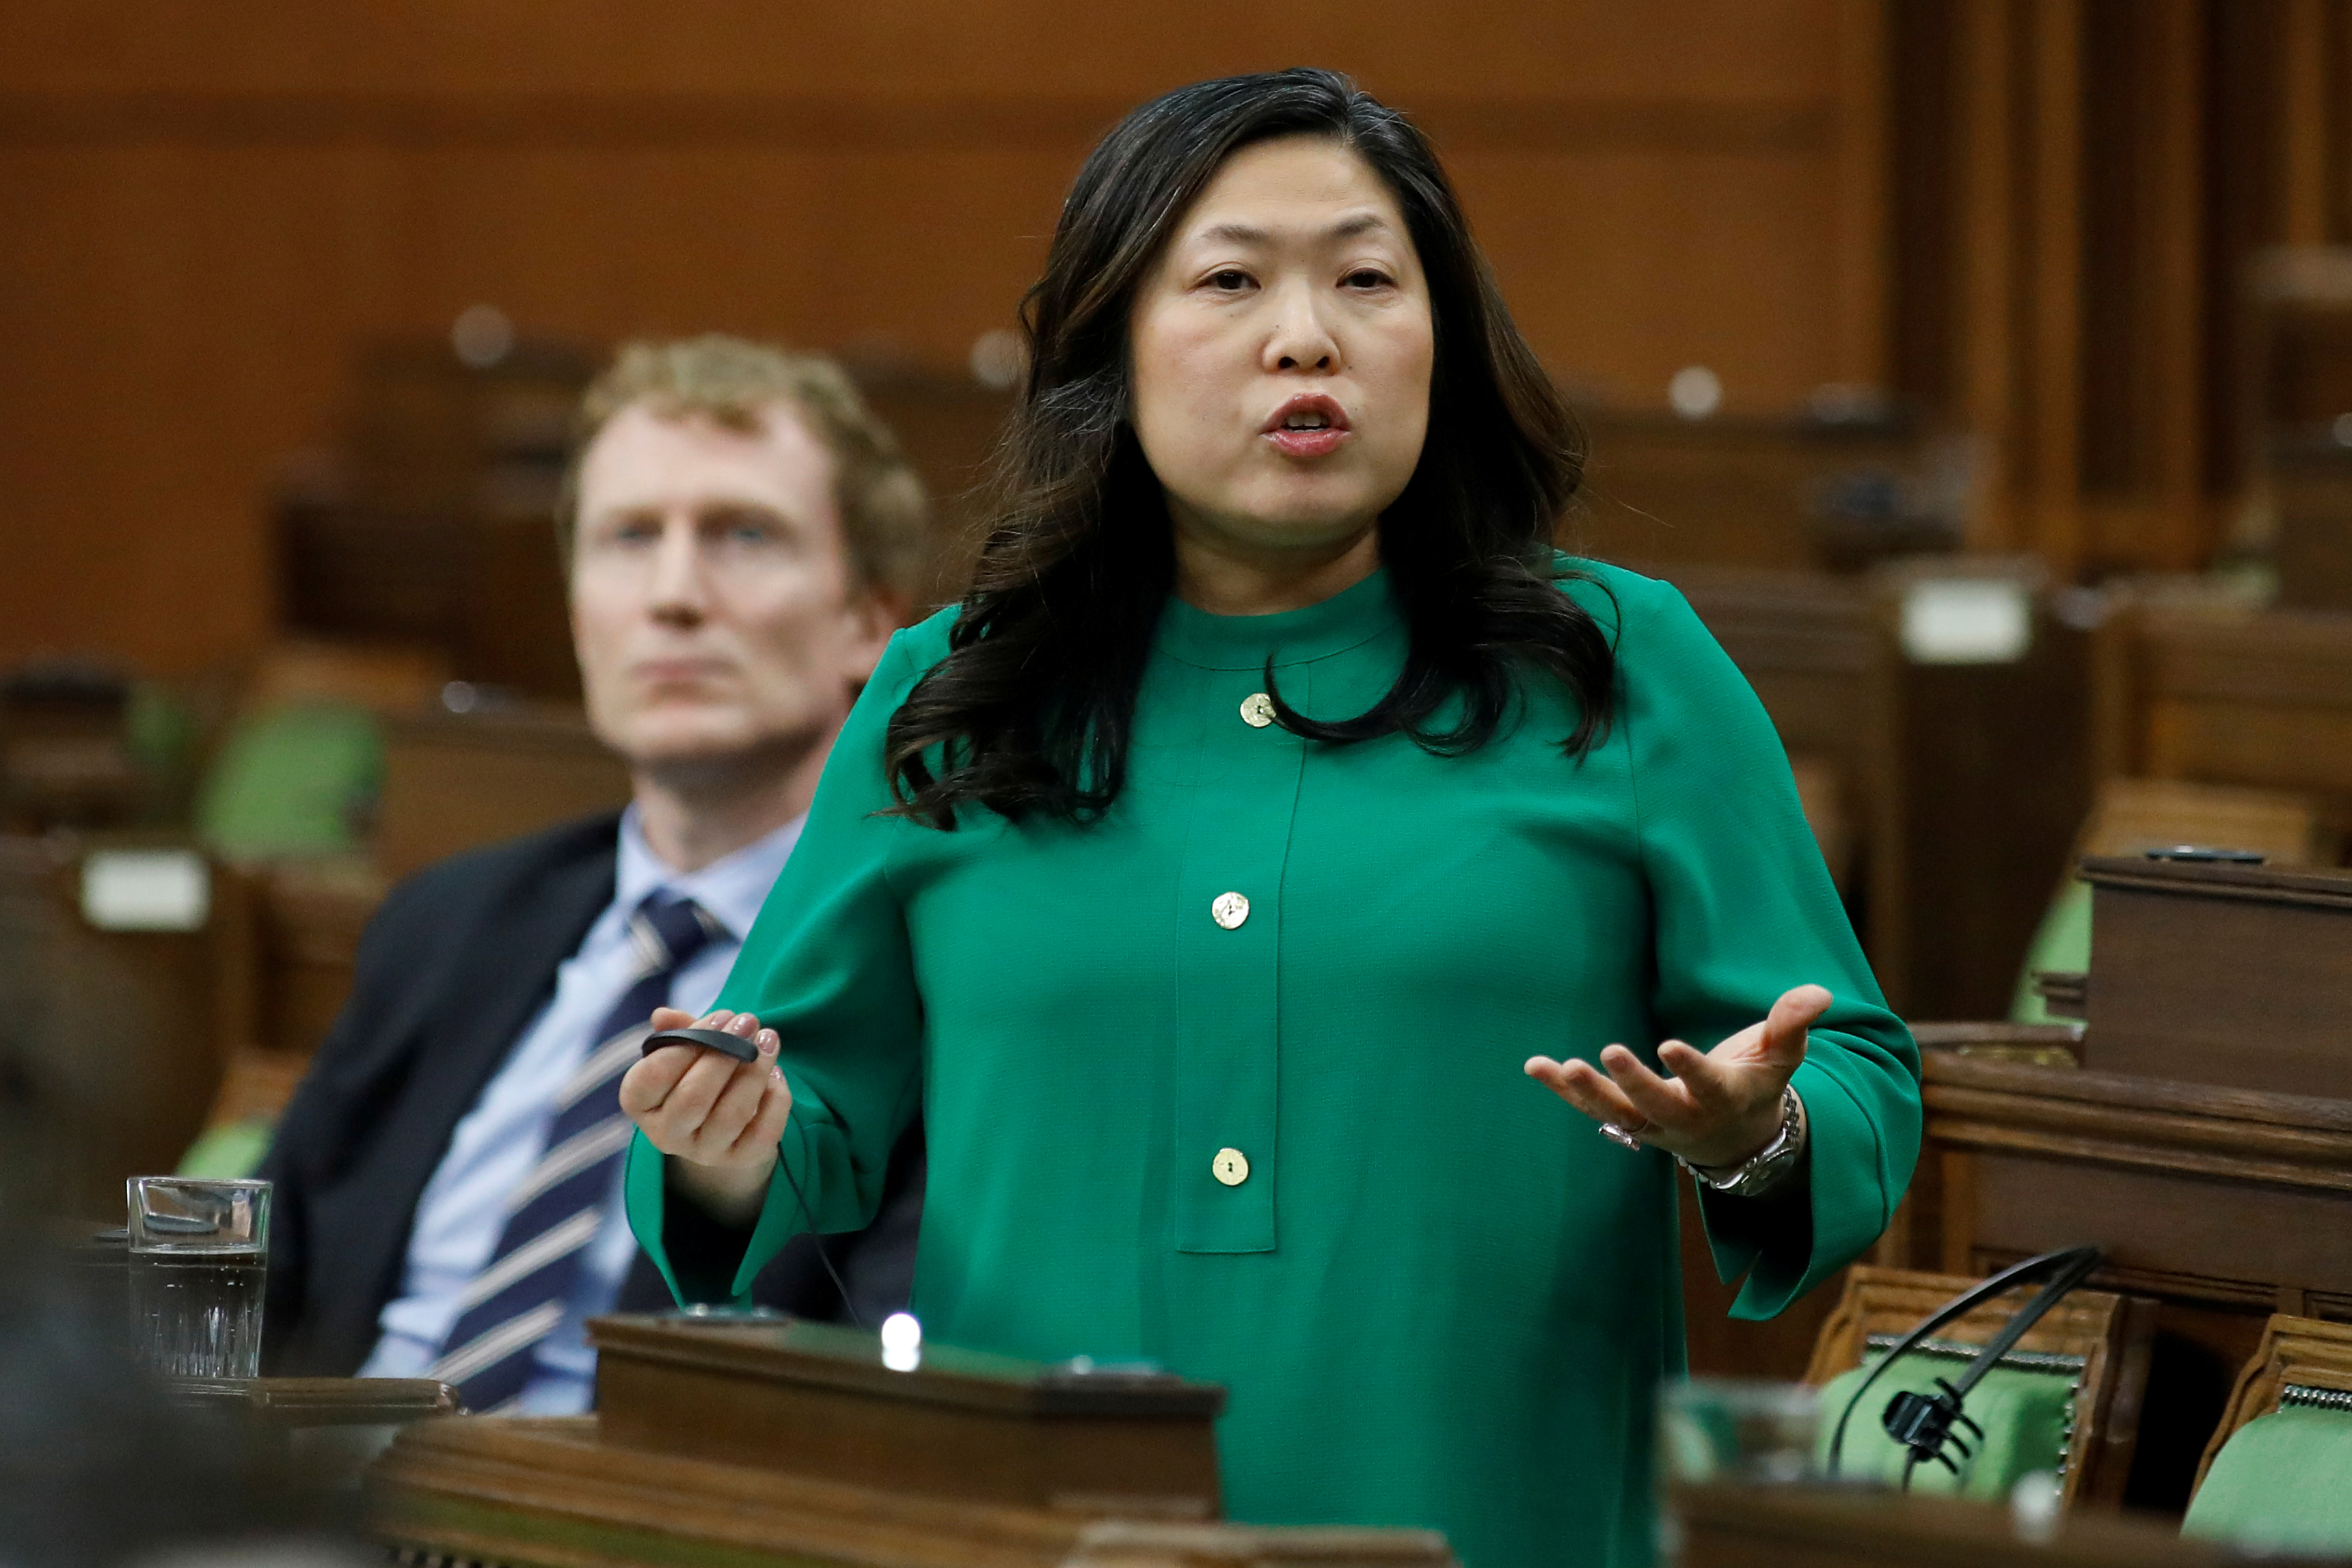 Canada's Minister of Small Business, Export Promotion and International Trade Mary Ng speaks during Question Period in the House of Commons on Parliament Hill, as efforts continue to help slow the spread of the coronavirus disease (COVID-19), in Ottawa, Ontario, Canada April 20, 2020. REUTERS/Blair Gable/File Photo